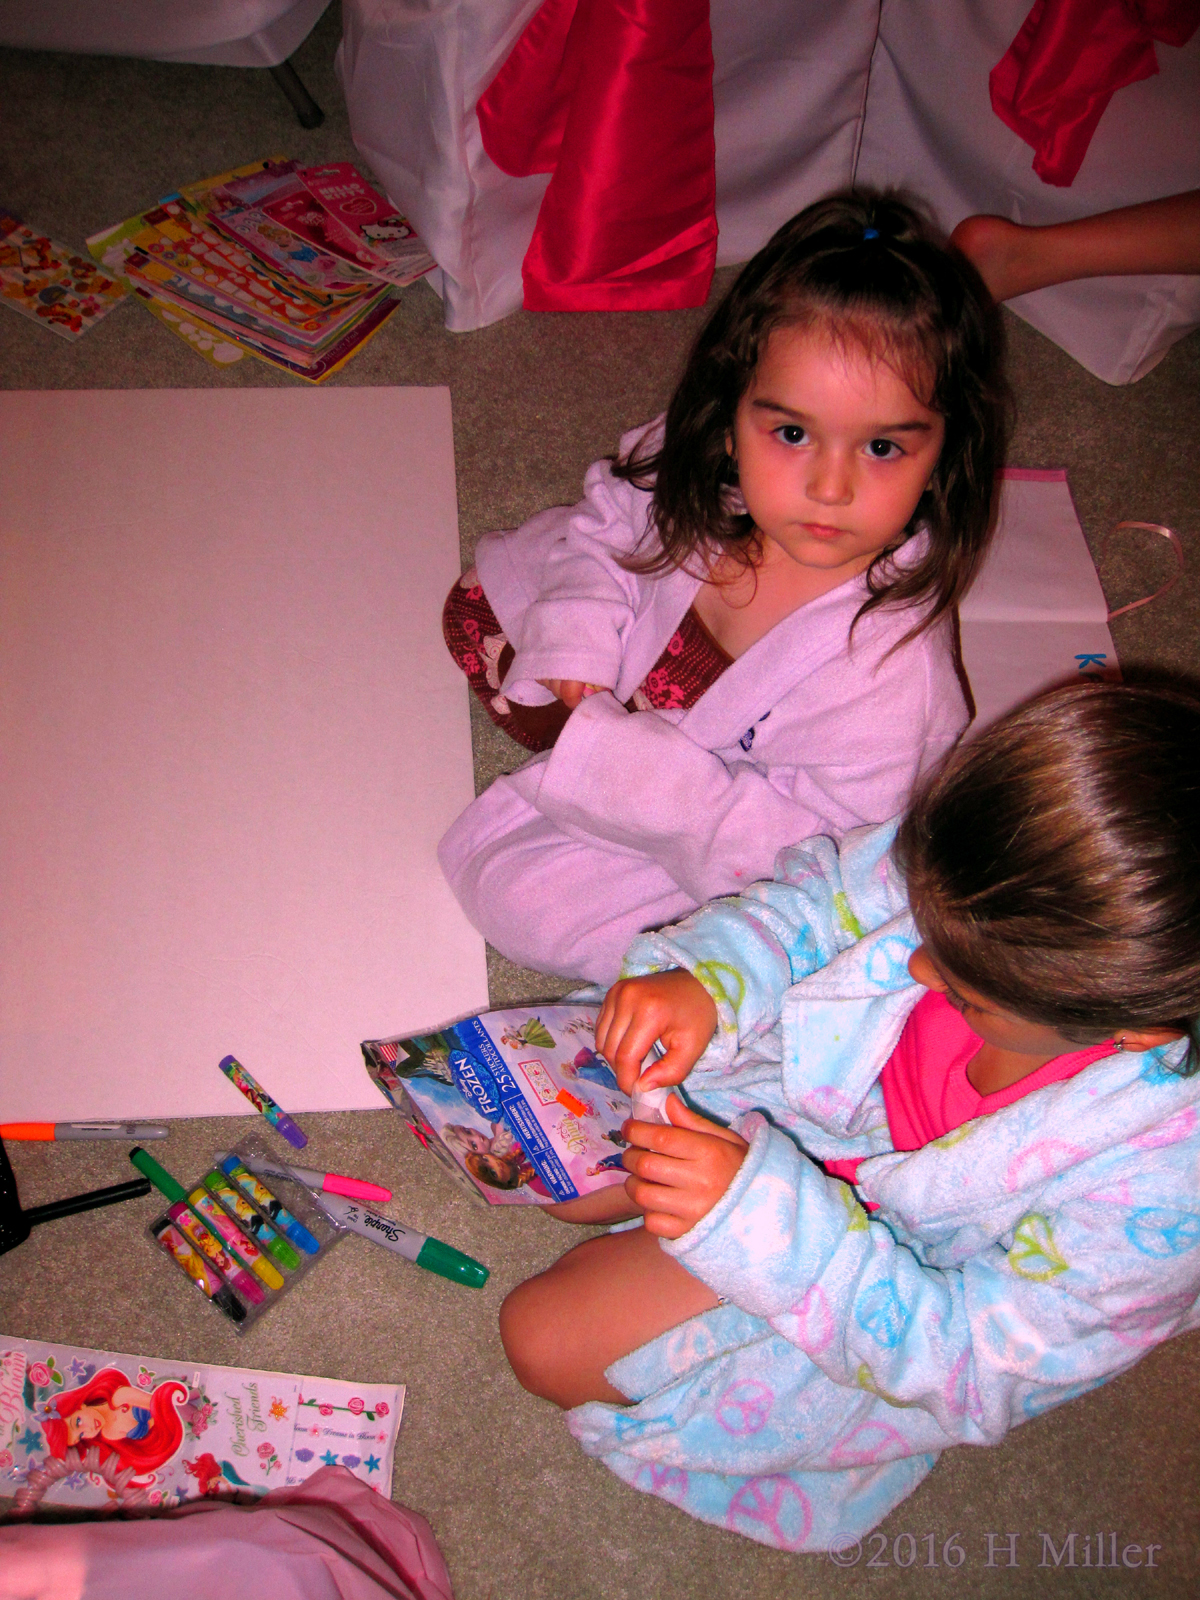 Decorating The Kids Spa Birthday Card Is More Fun With Friends! 